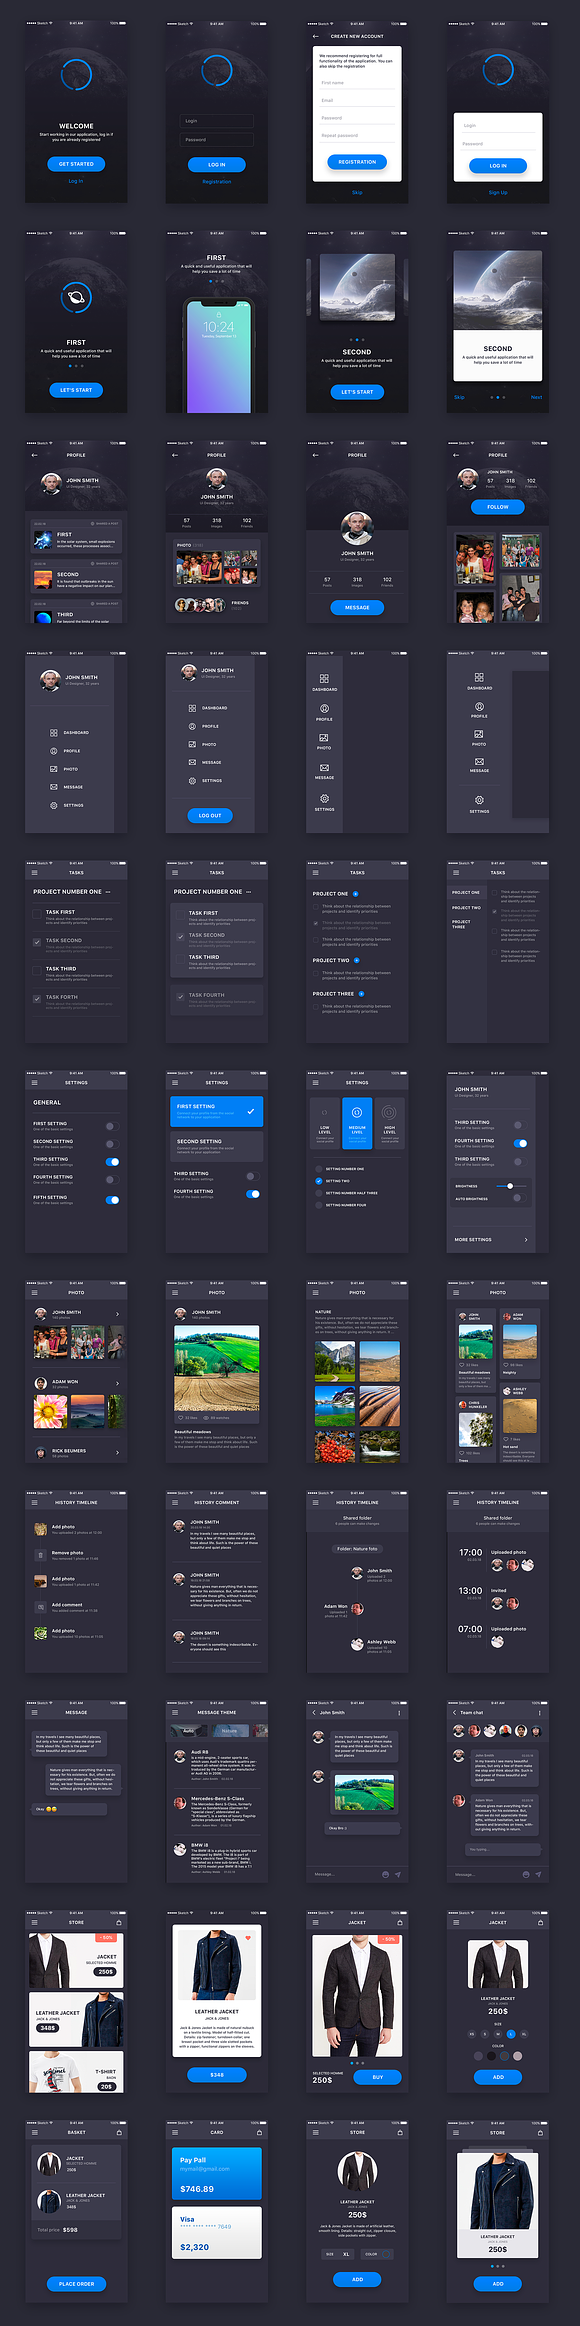 Pluton. Mobile UI Kit in UI Kits and Libraries - product preview 4